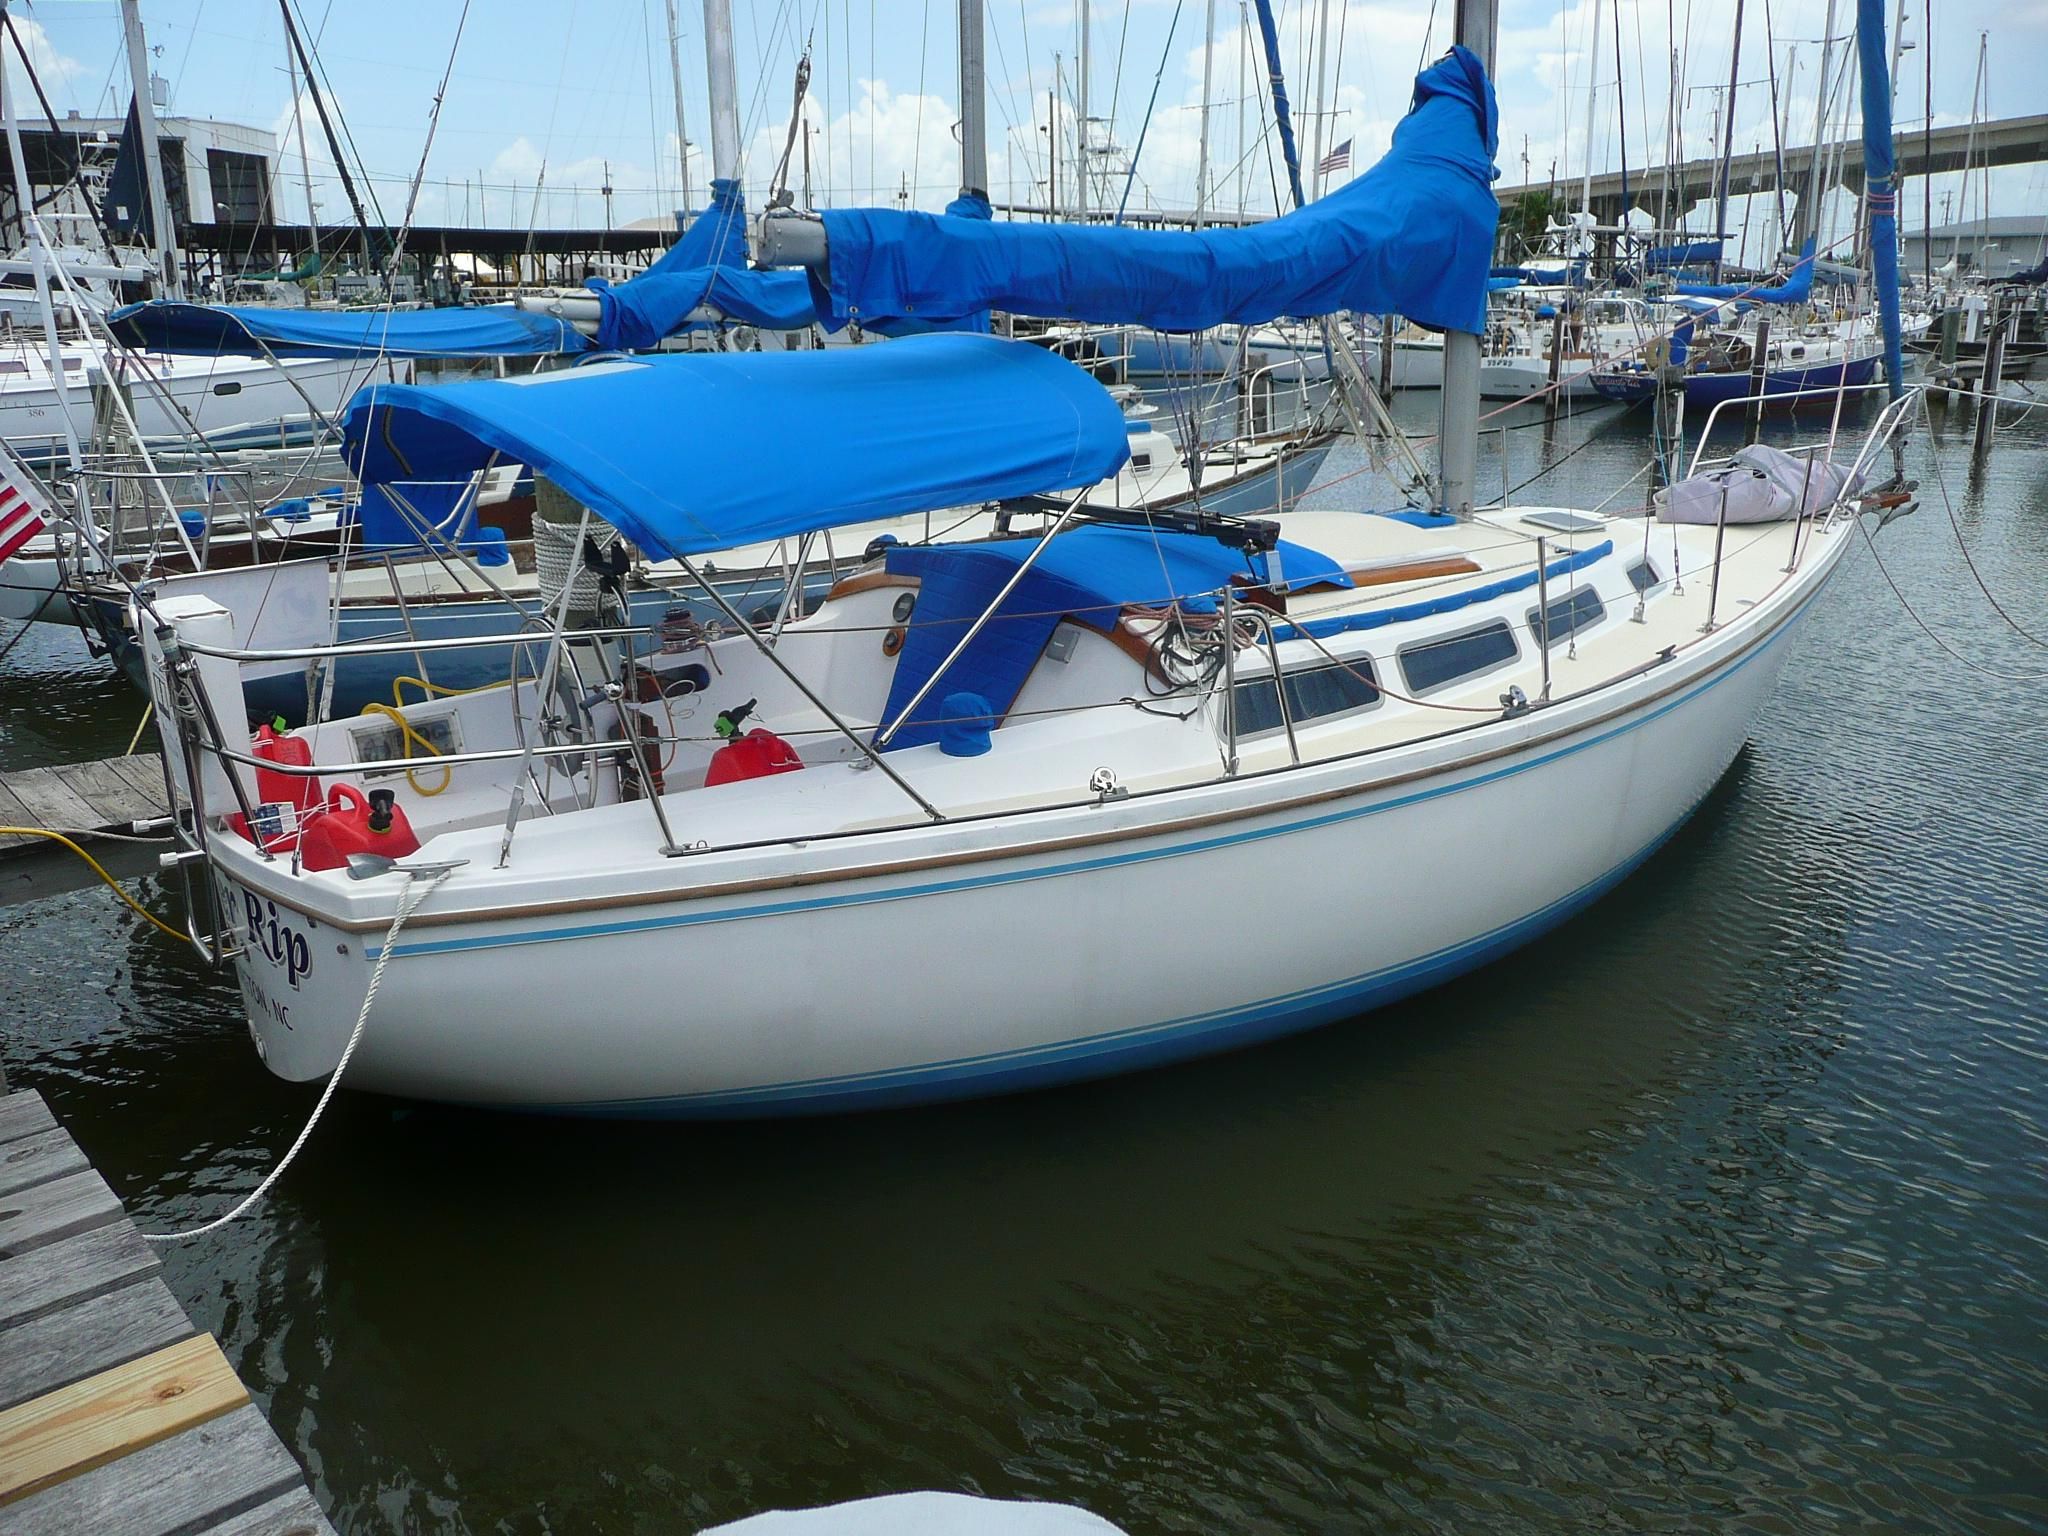 30 foot catalina sailboat for sale